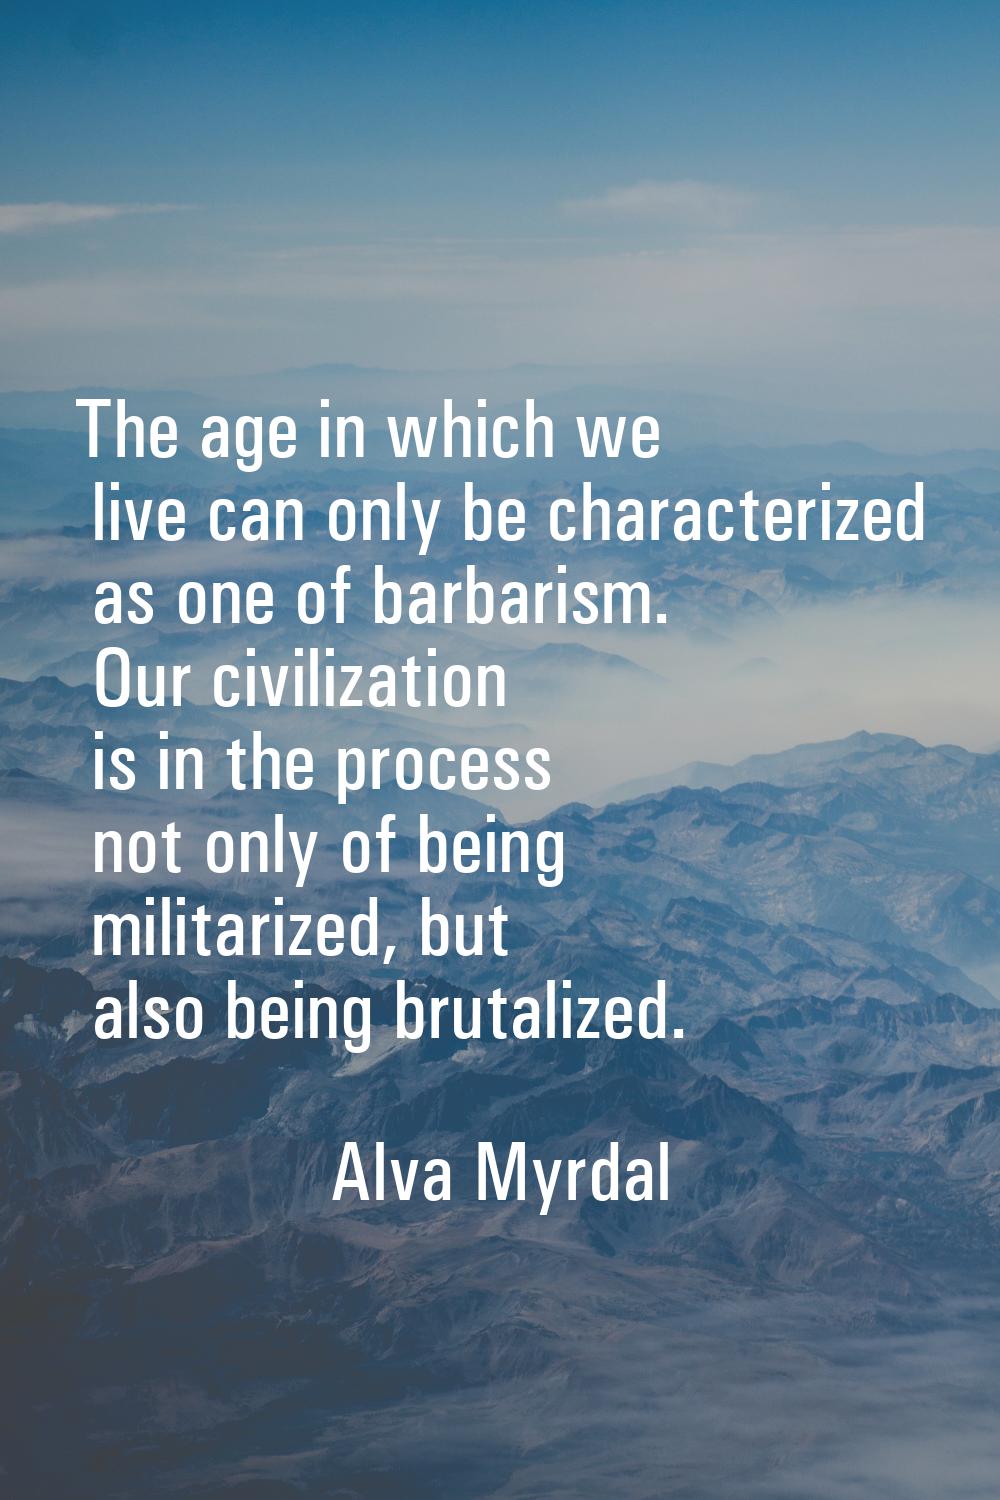 The age in which we live can only be characterized as one of barbarism. Our civilization is in the 